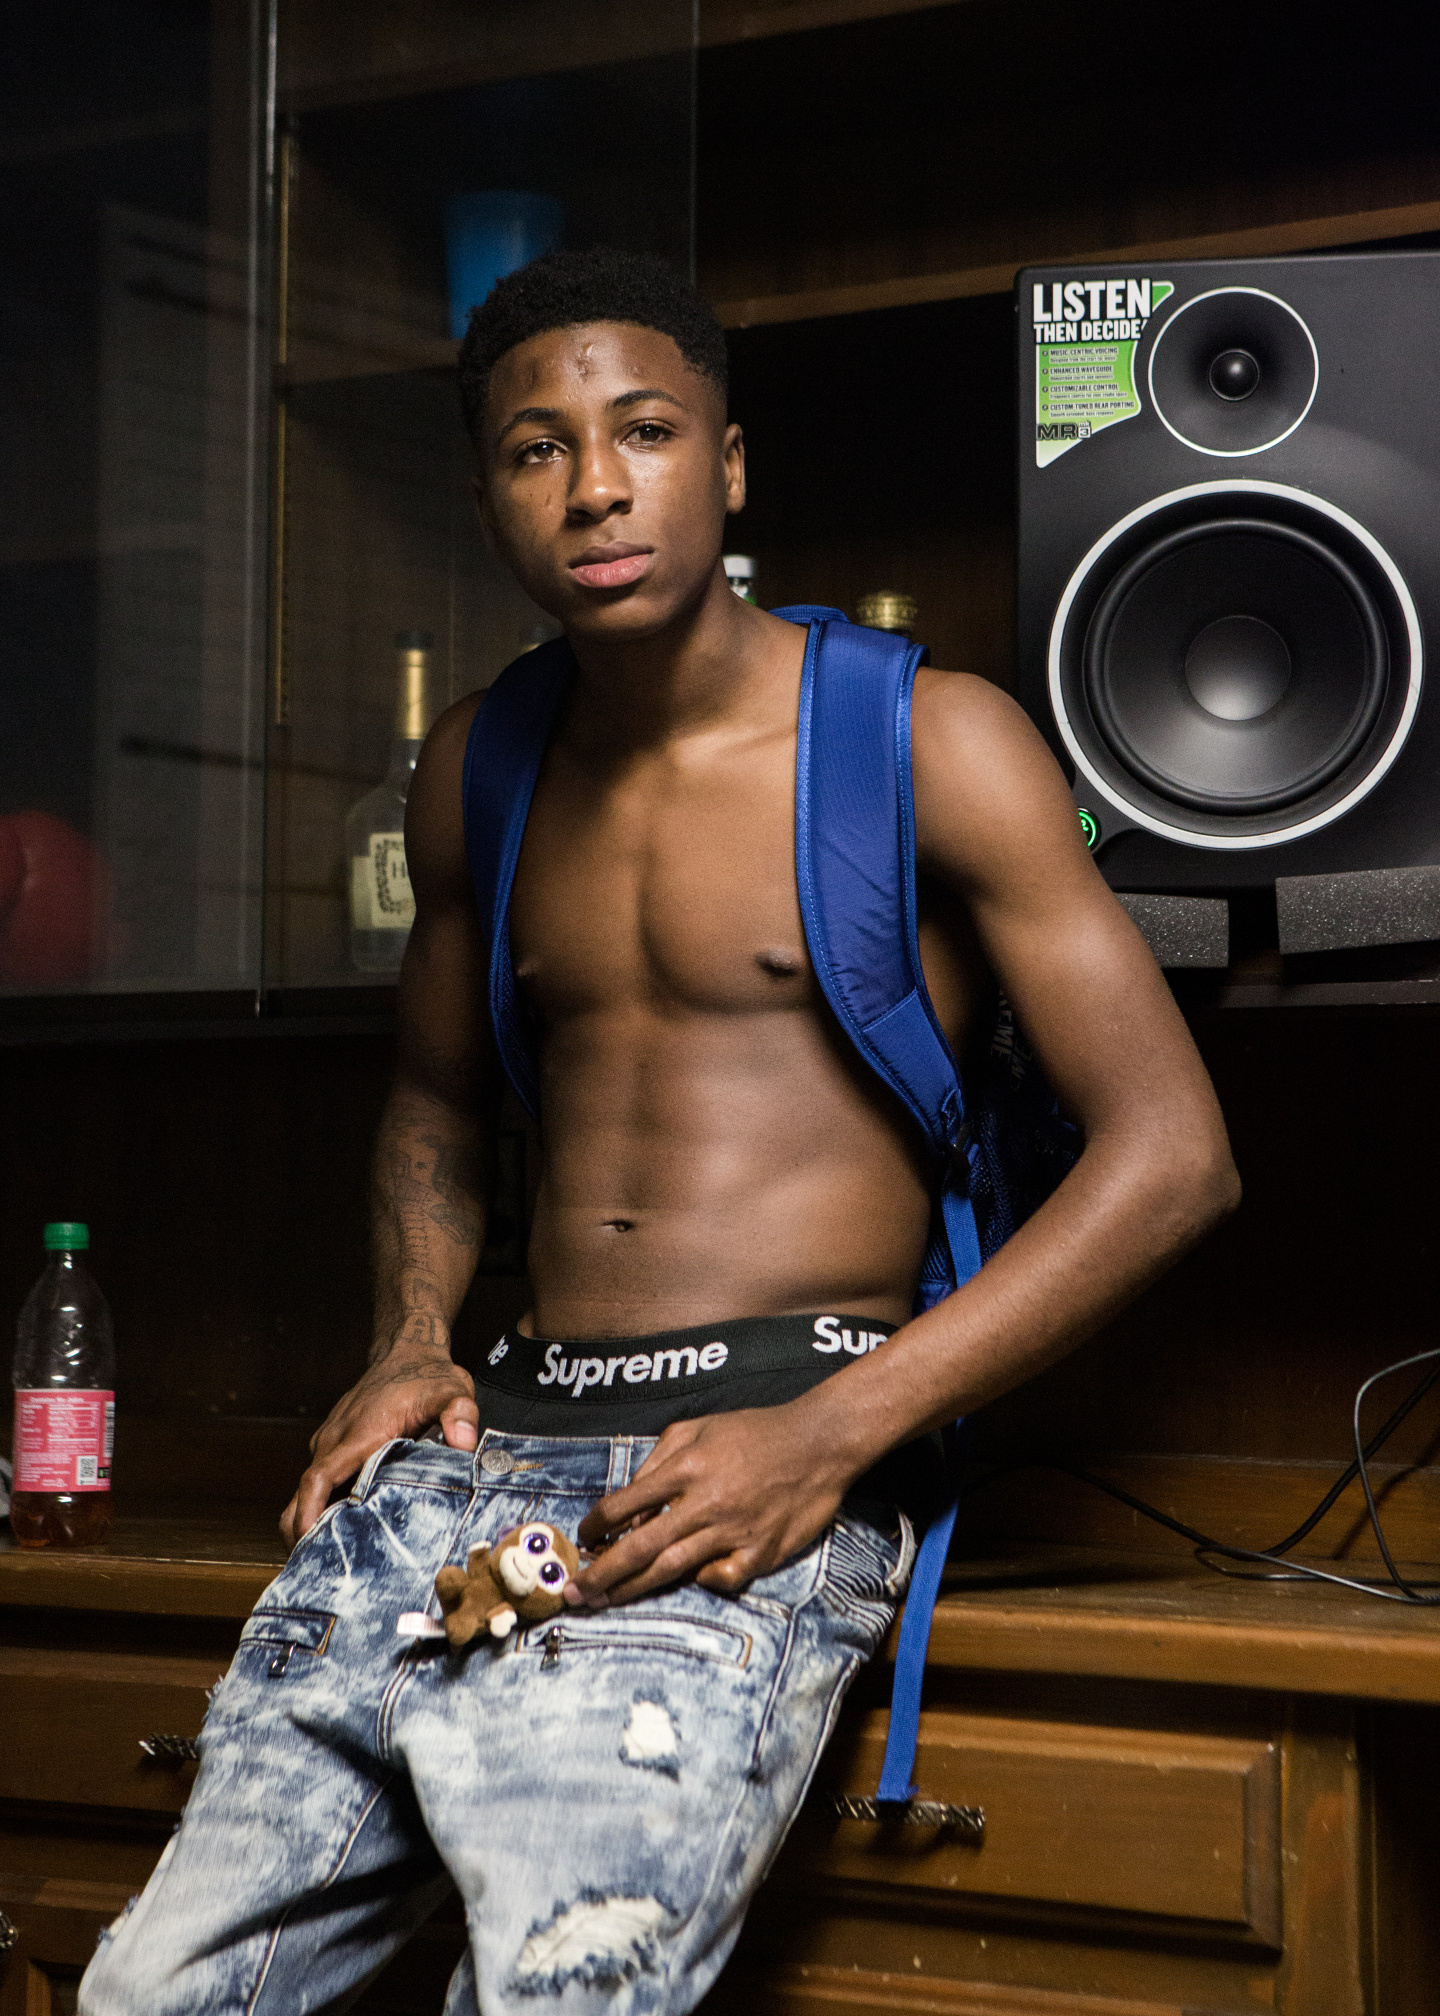 Meet Nba Youngboy Baton Rouge S Rawest New Rapper The Fader